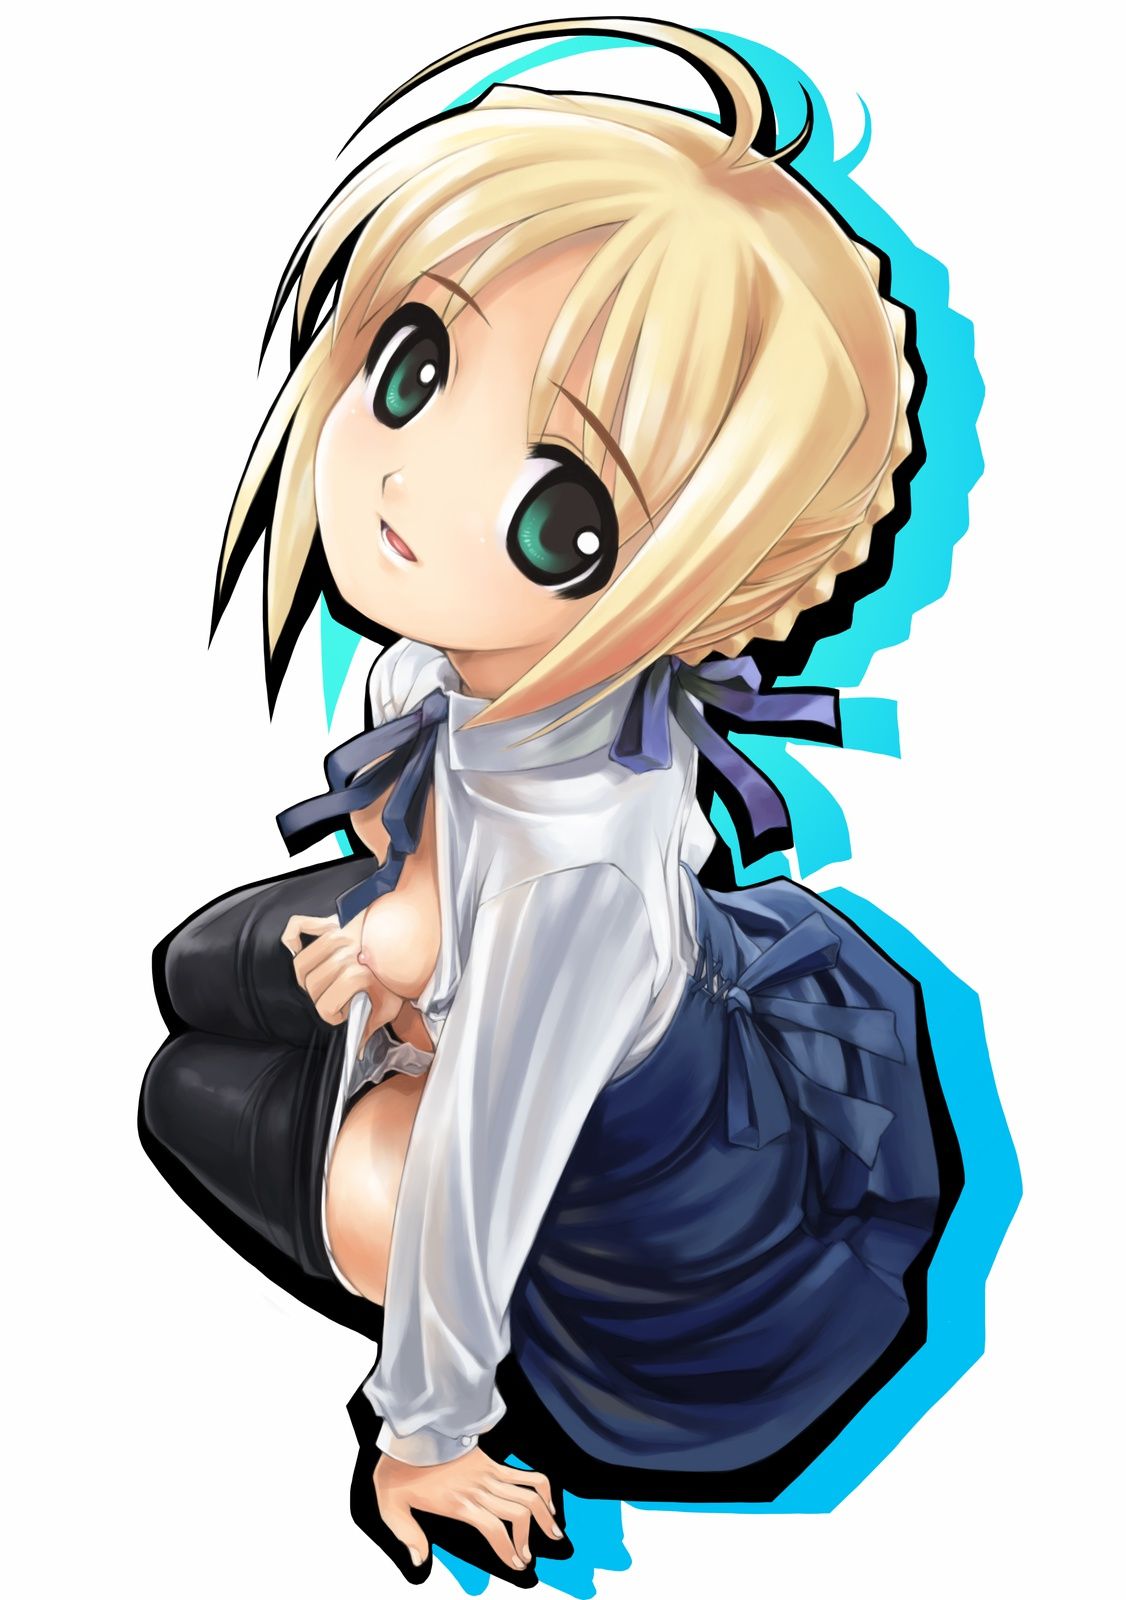 Fate: A do erotic through image that is becoming saber's iki face 2